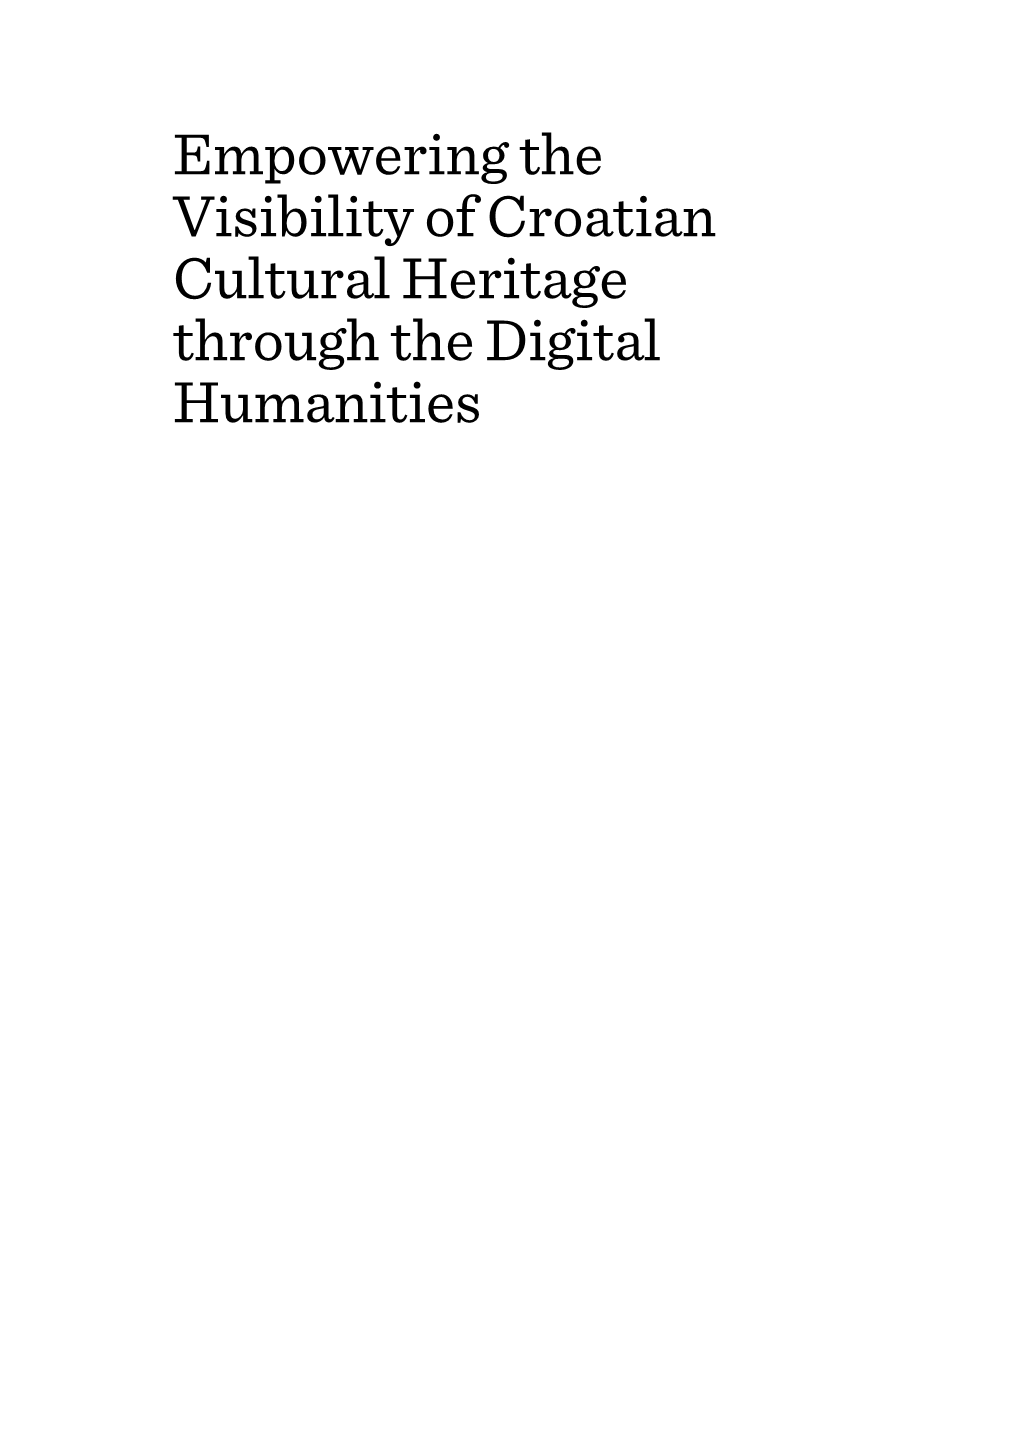 Empowering the Visibility of Croatian Cultural Heritage Through the Digital Humanities